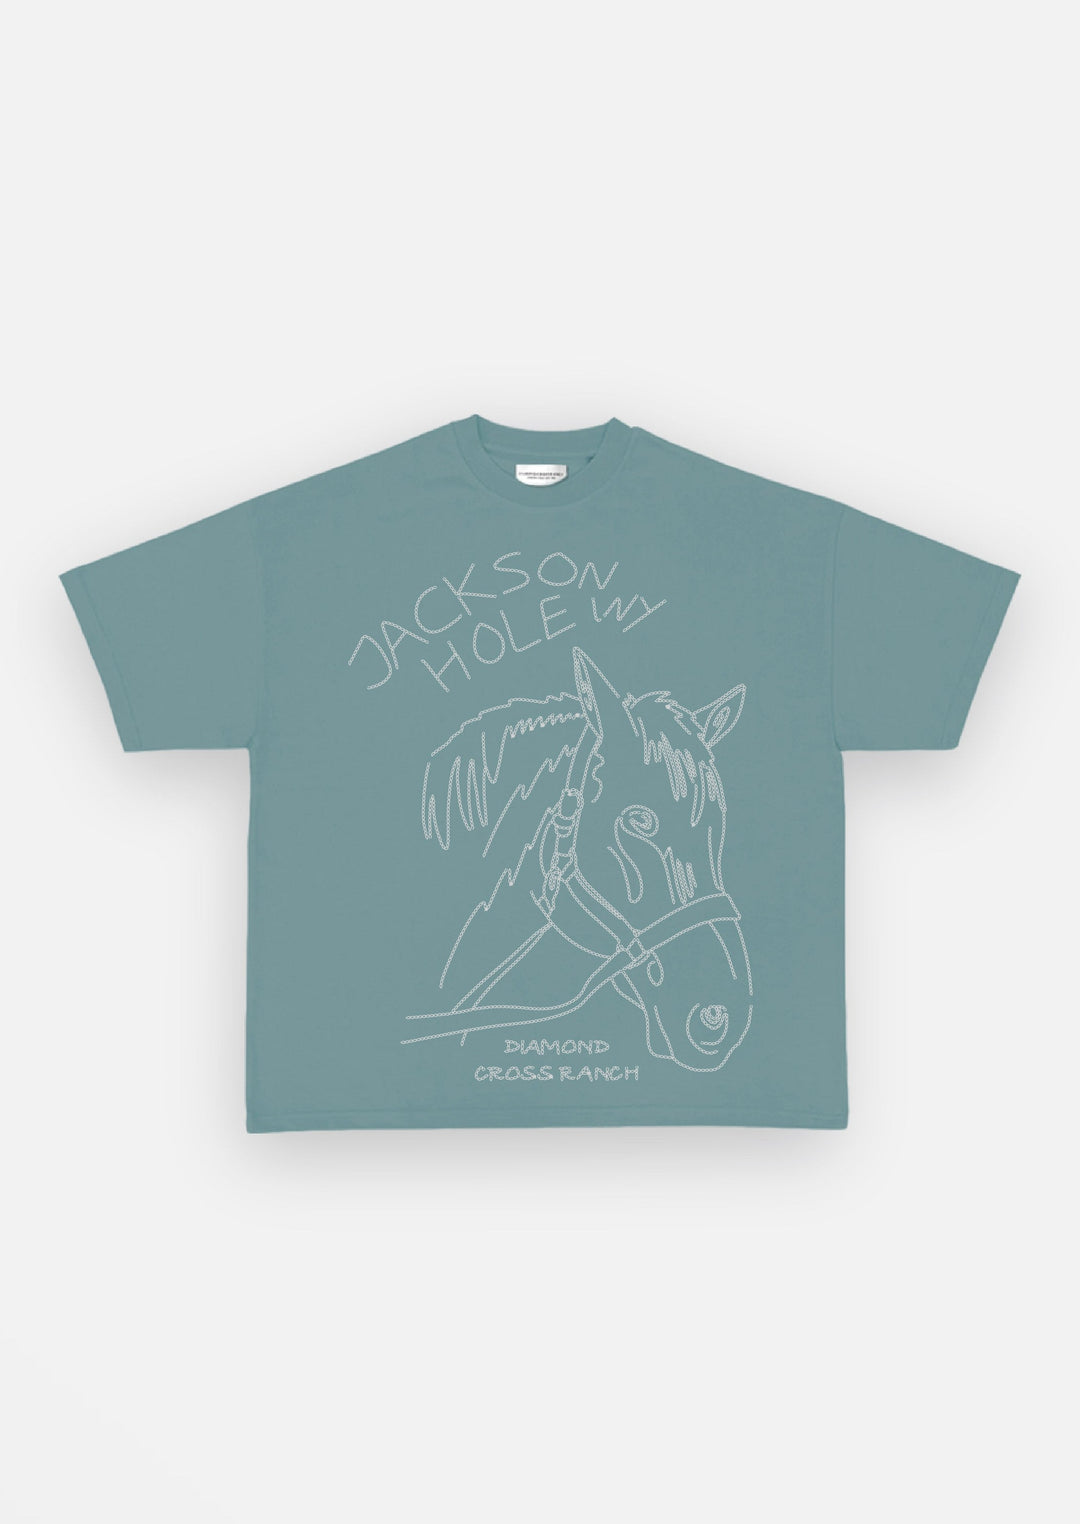 Chainstitch Horse Graphic (Limited Edition)